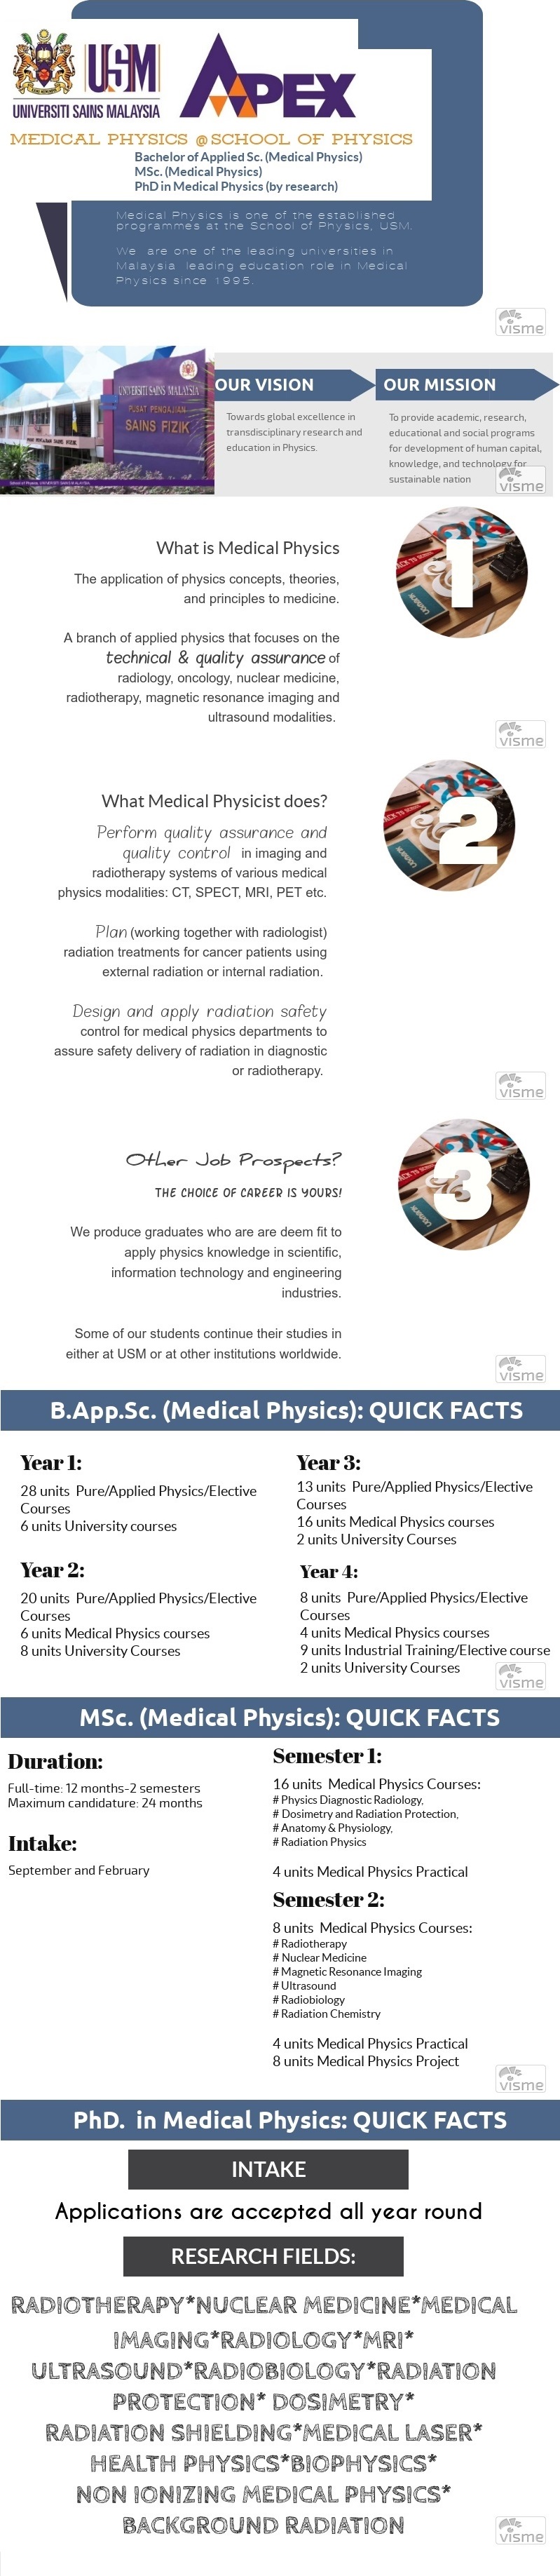 Infographic Medical Physics crop